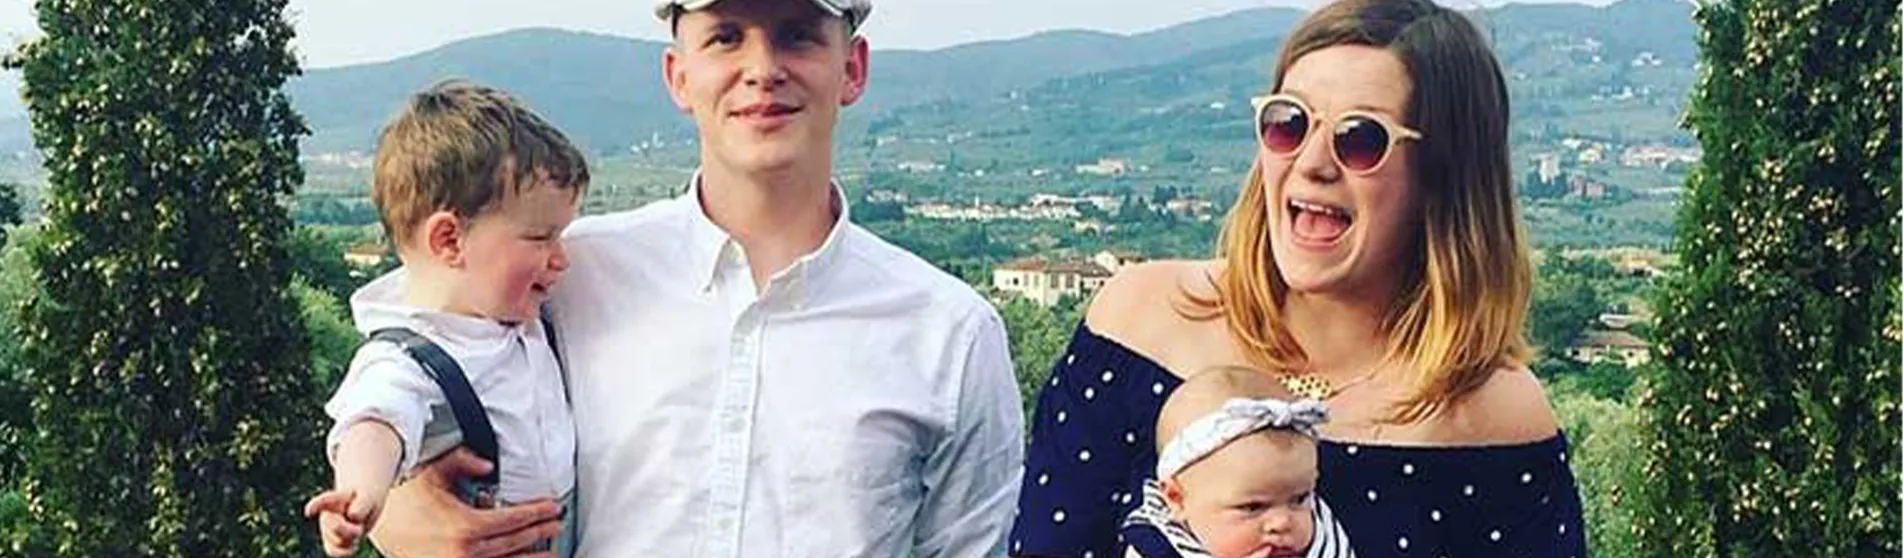 Hazel Reynolds with her young family and partner in somewhere that looks like Italy.